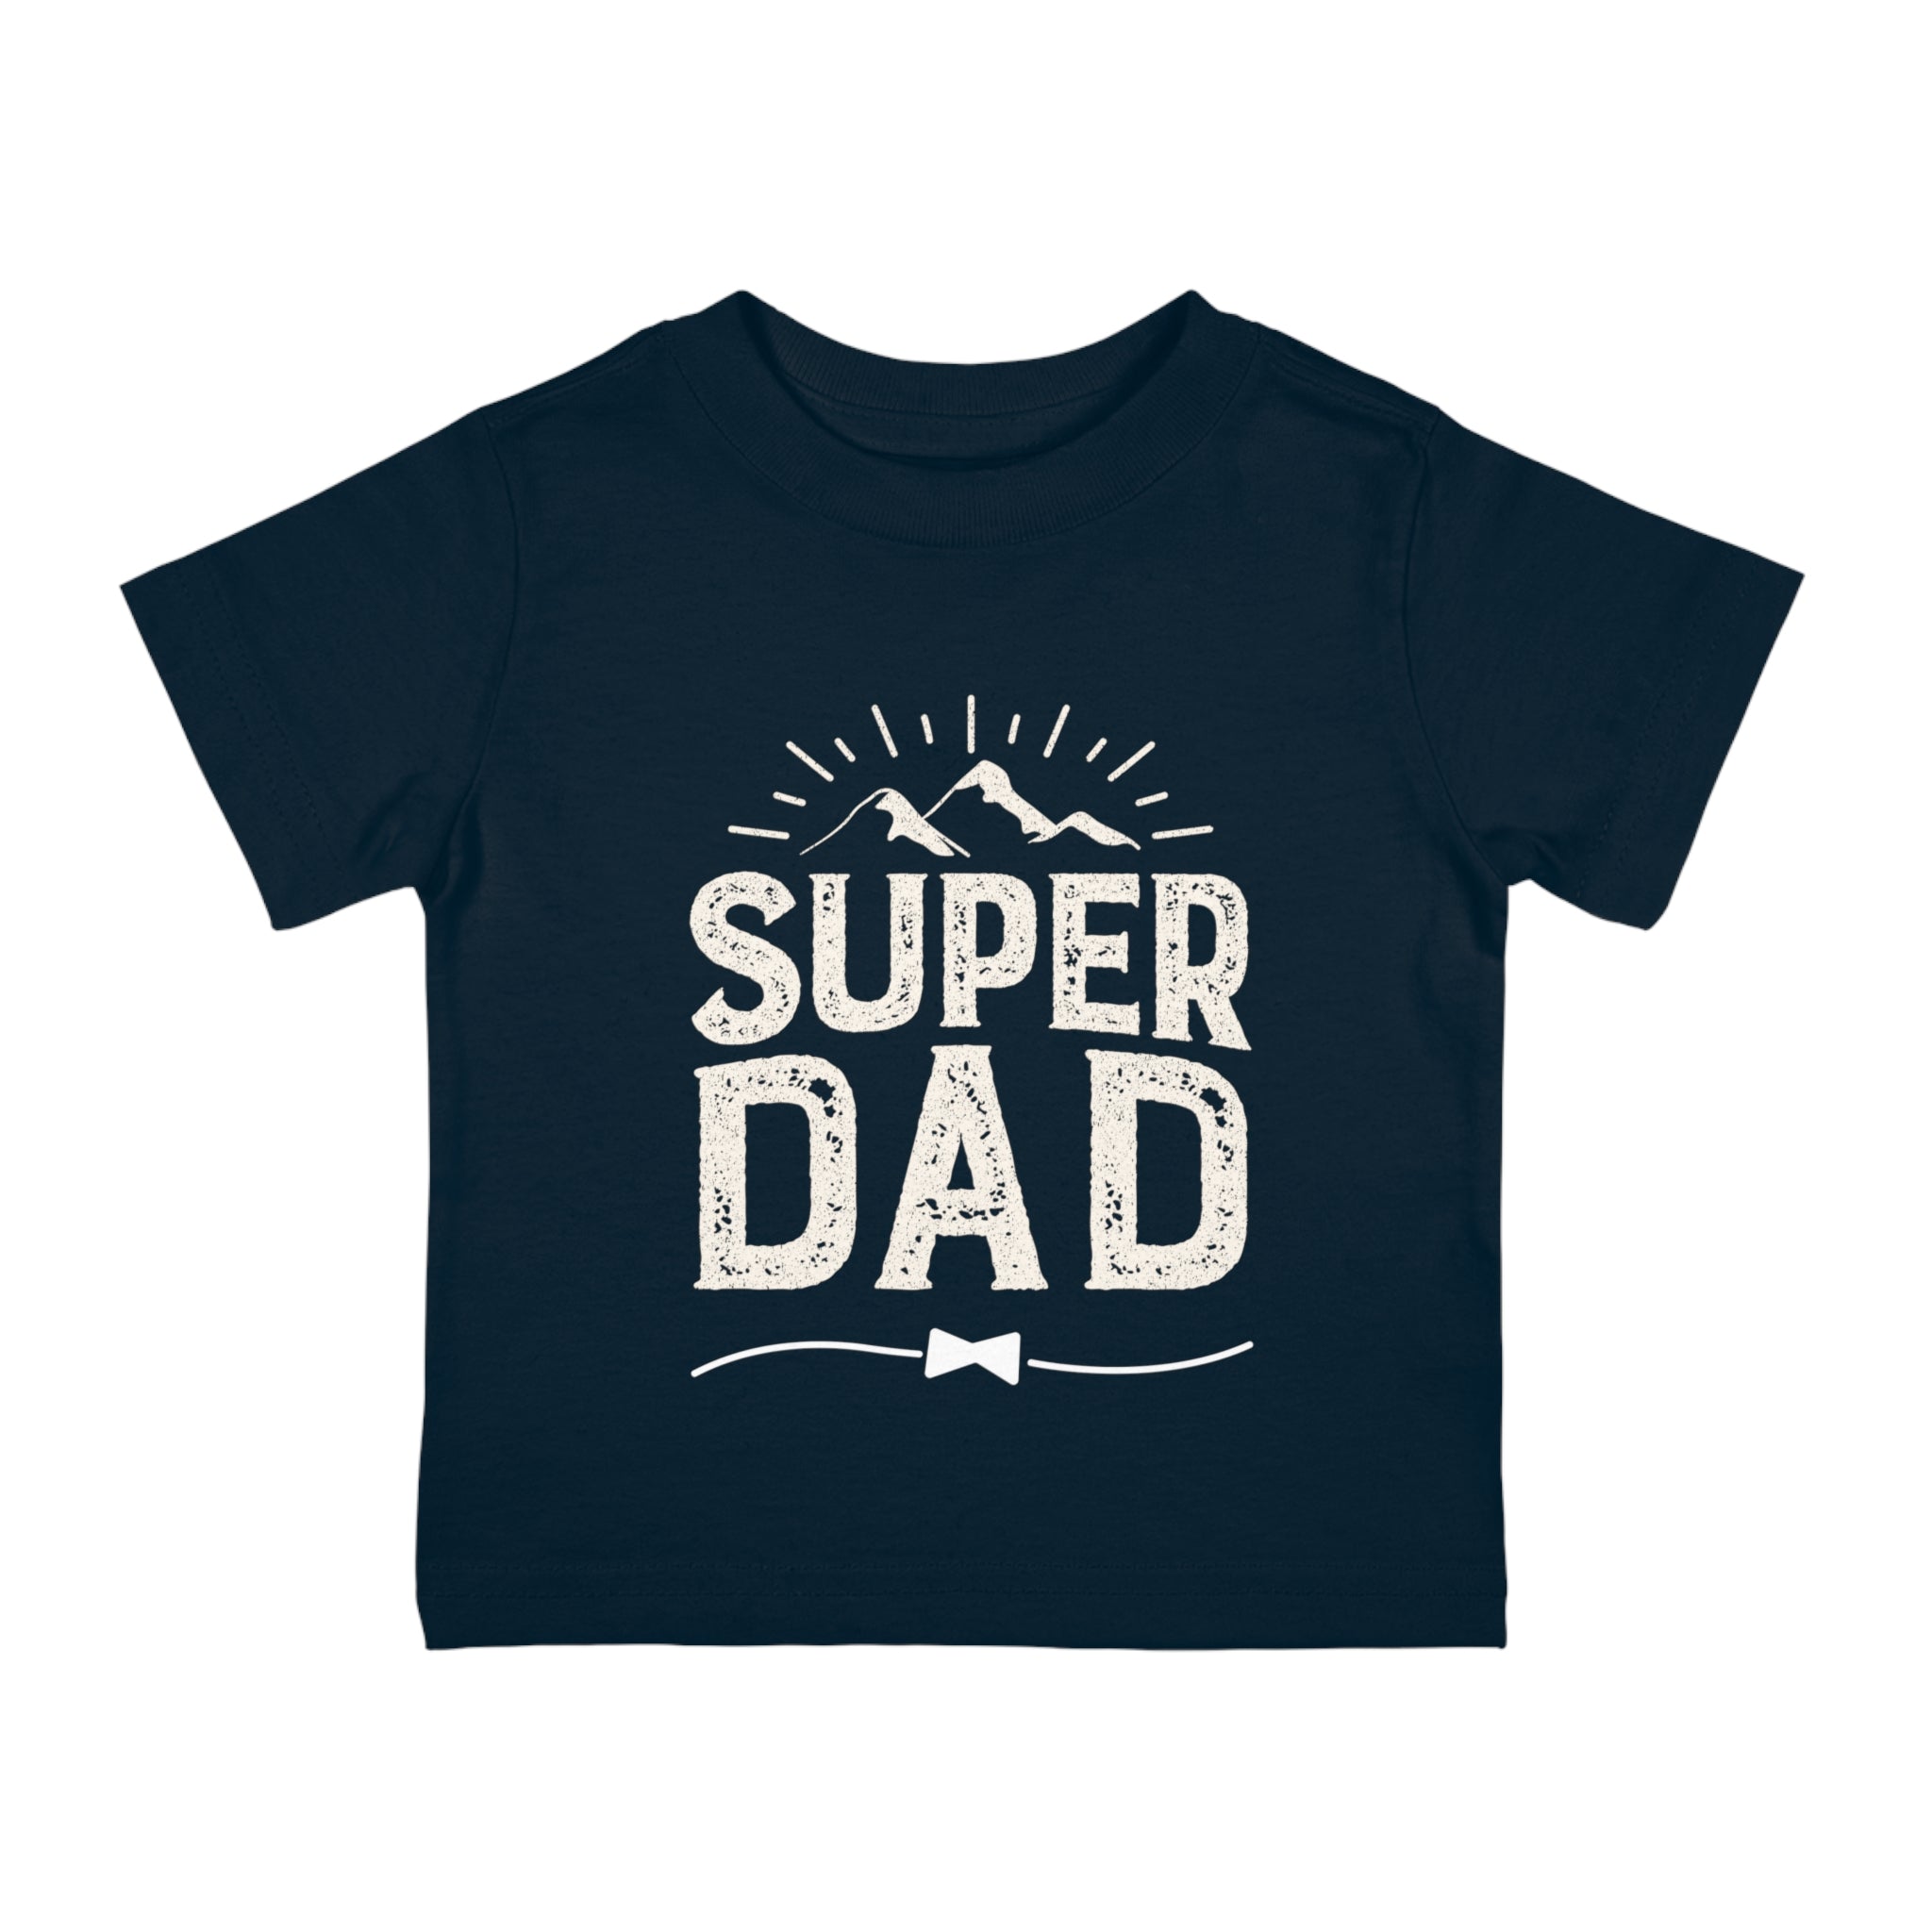 Super Dad Infant Shirt, Baby Tee, Infant Tee